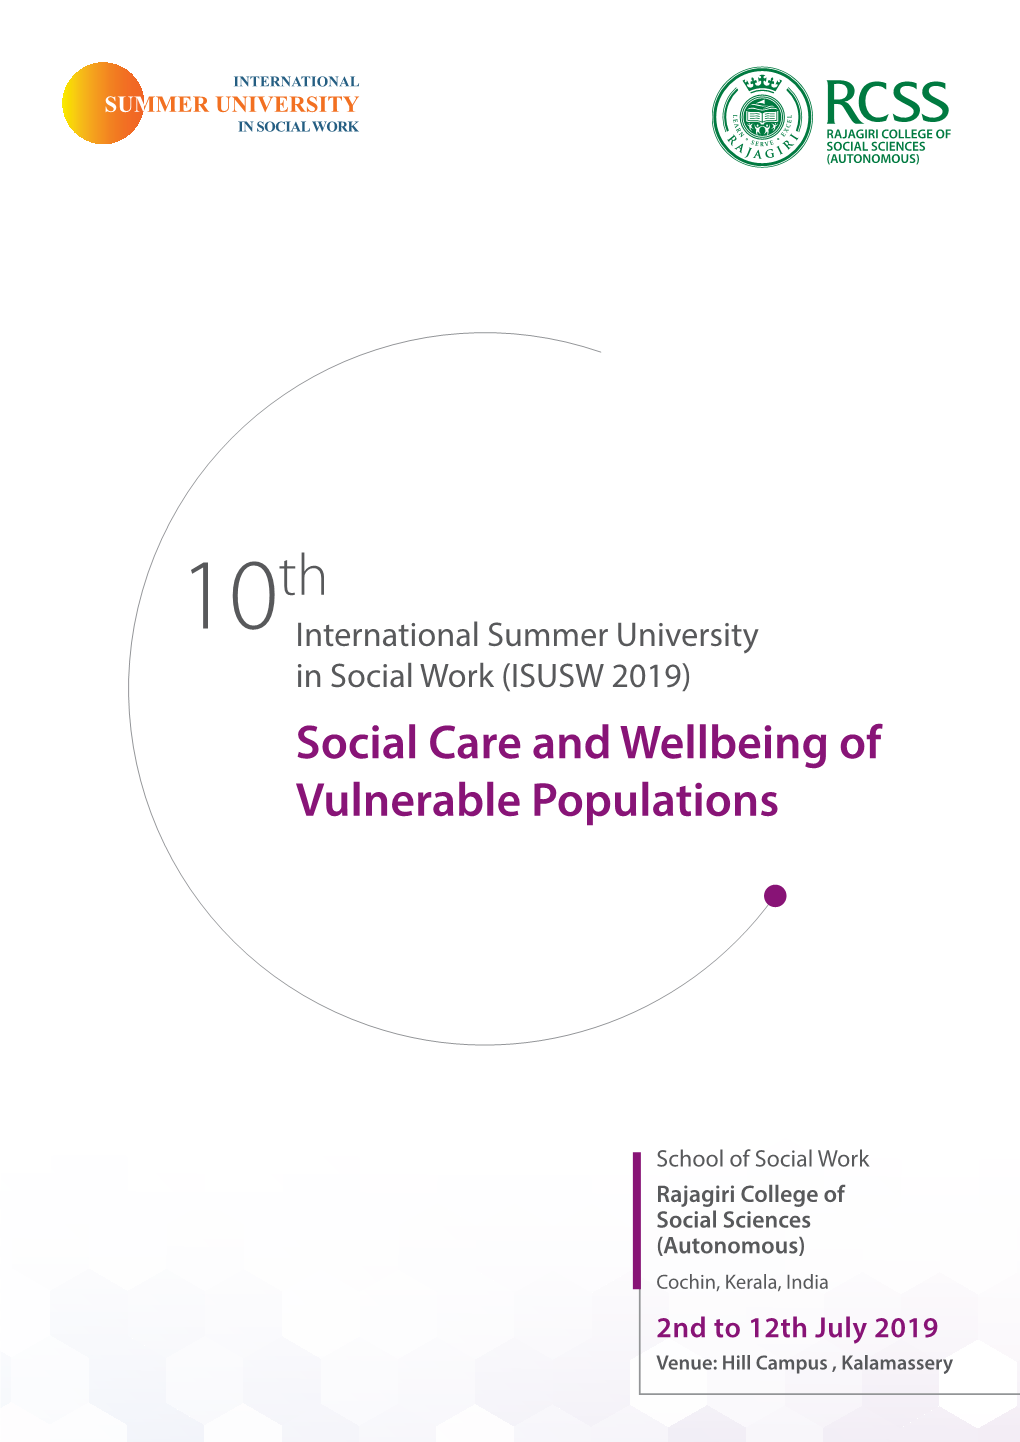 Social Care and Wellbeing of Vulnerable Populations